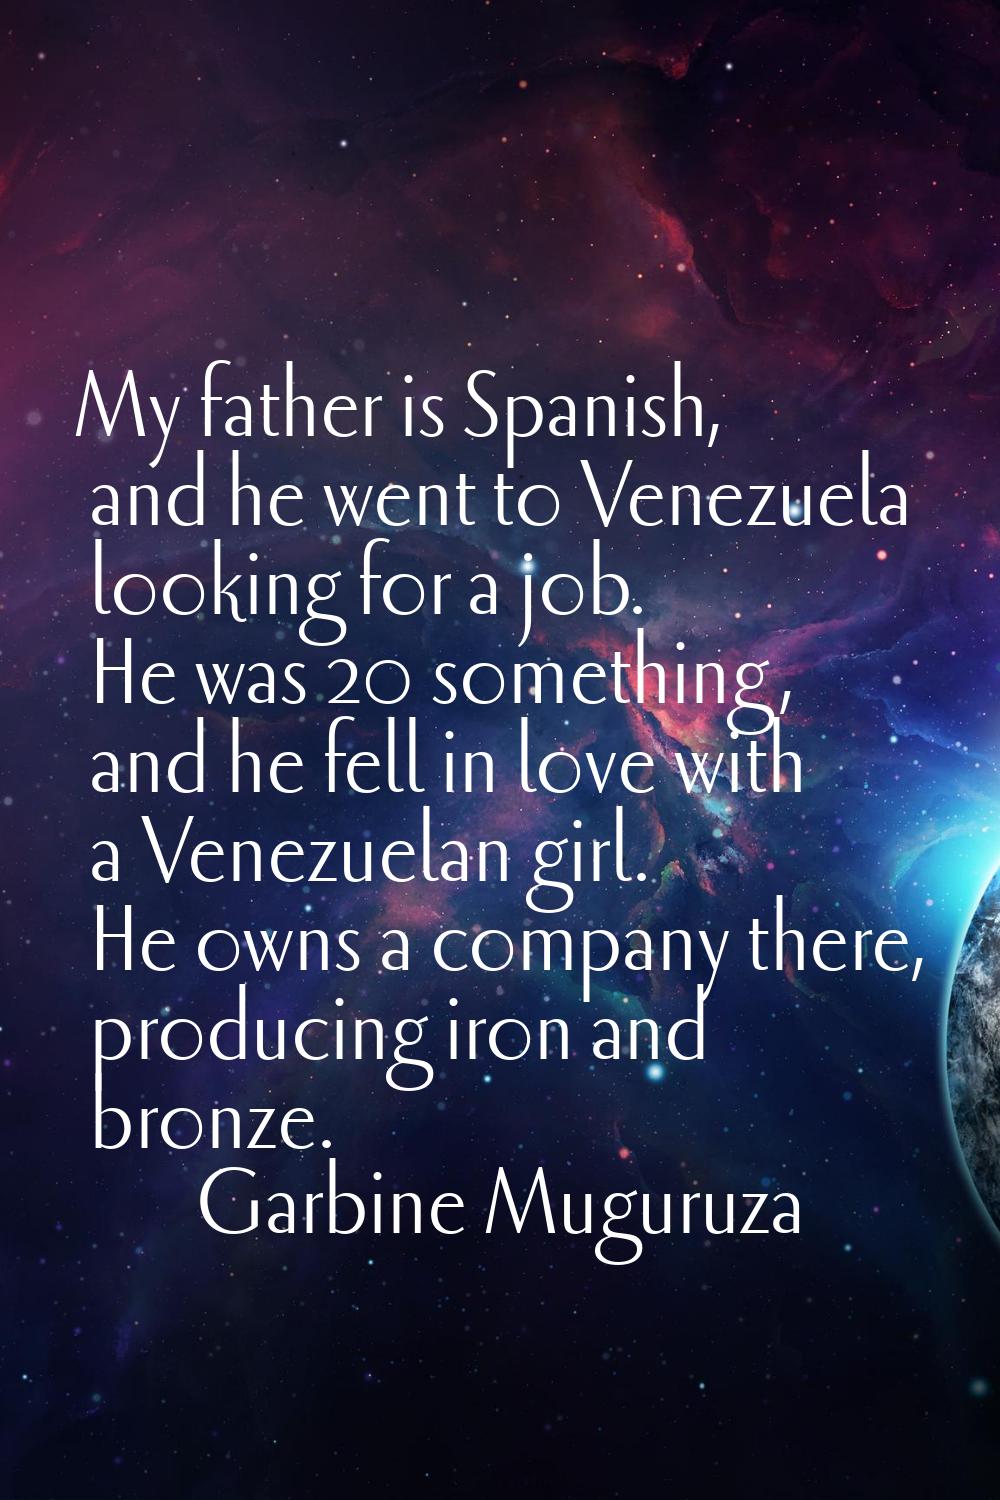 My father is Spanish, and he went to Venezuela looking for a job. He was 20 something, and he fell 